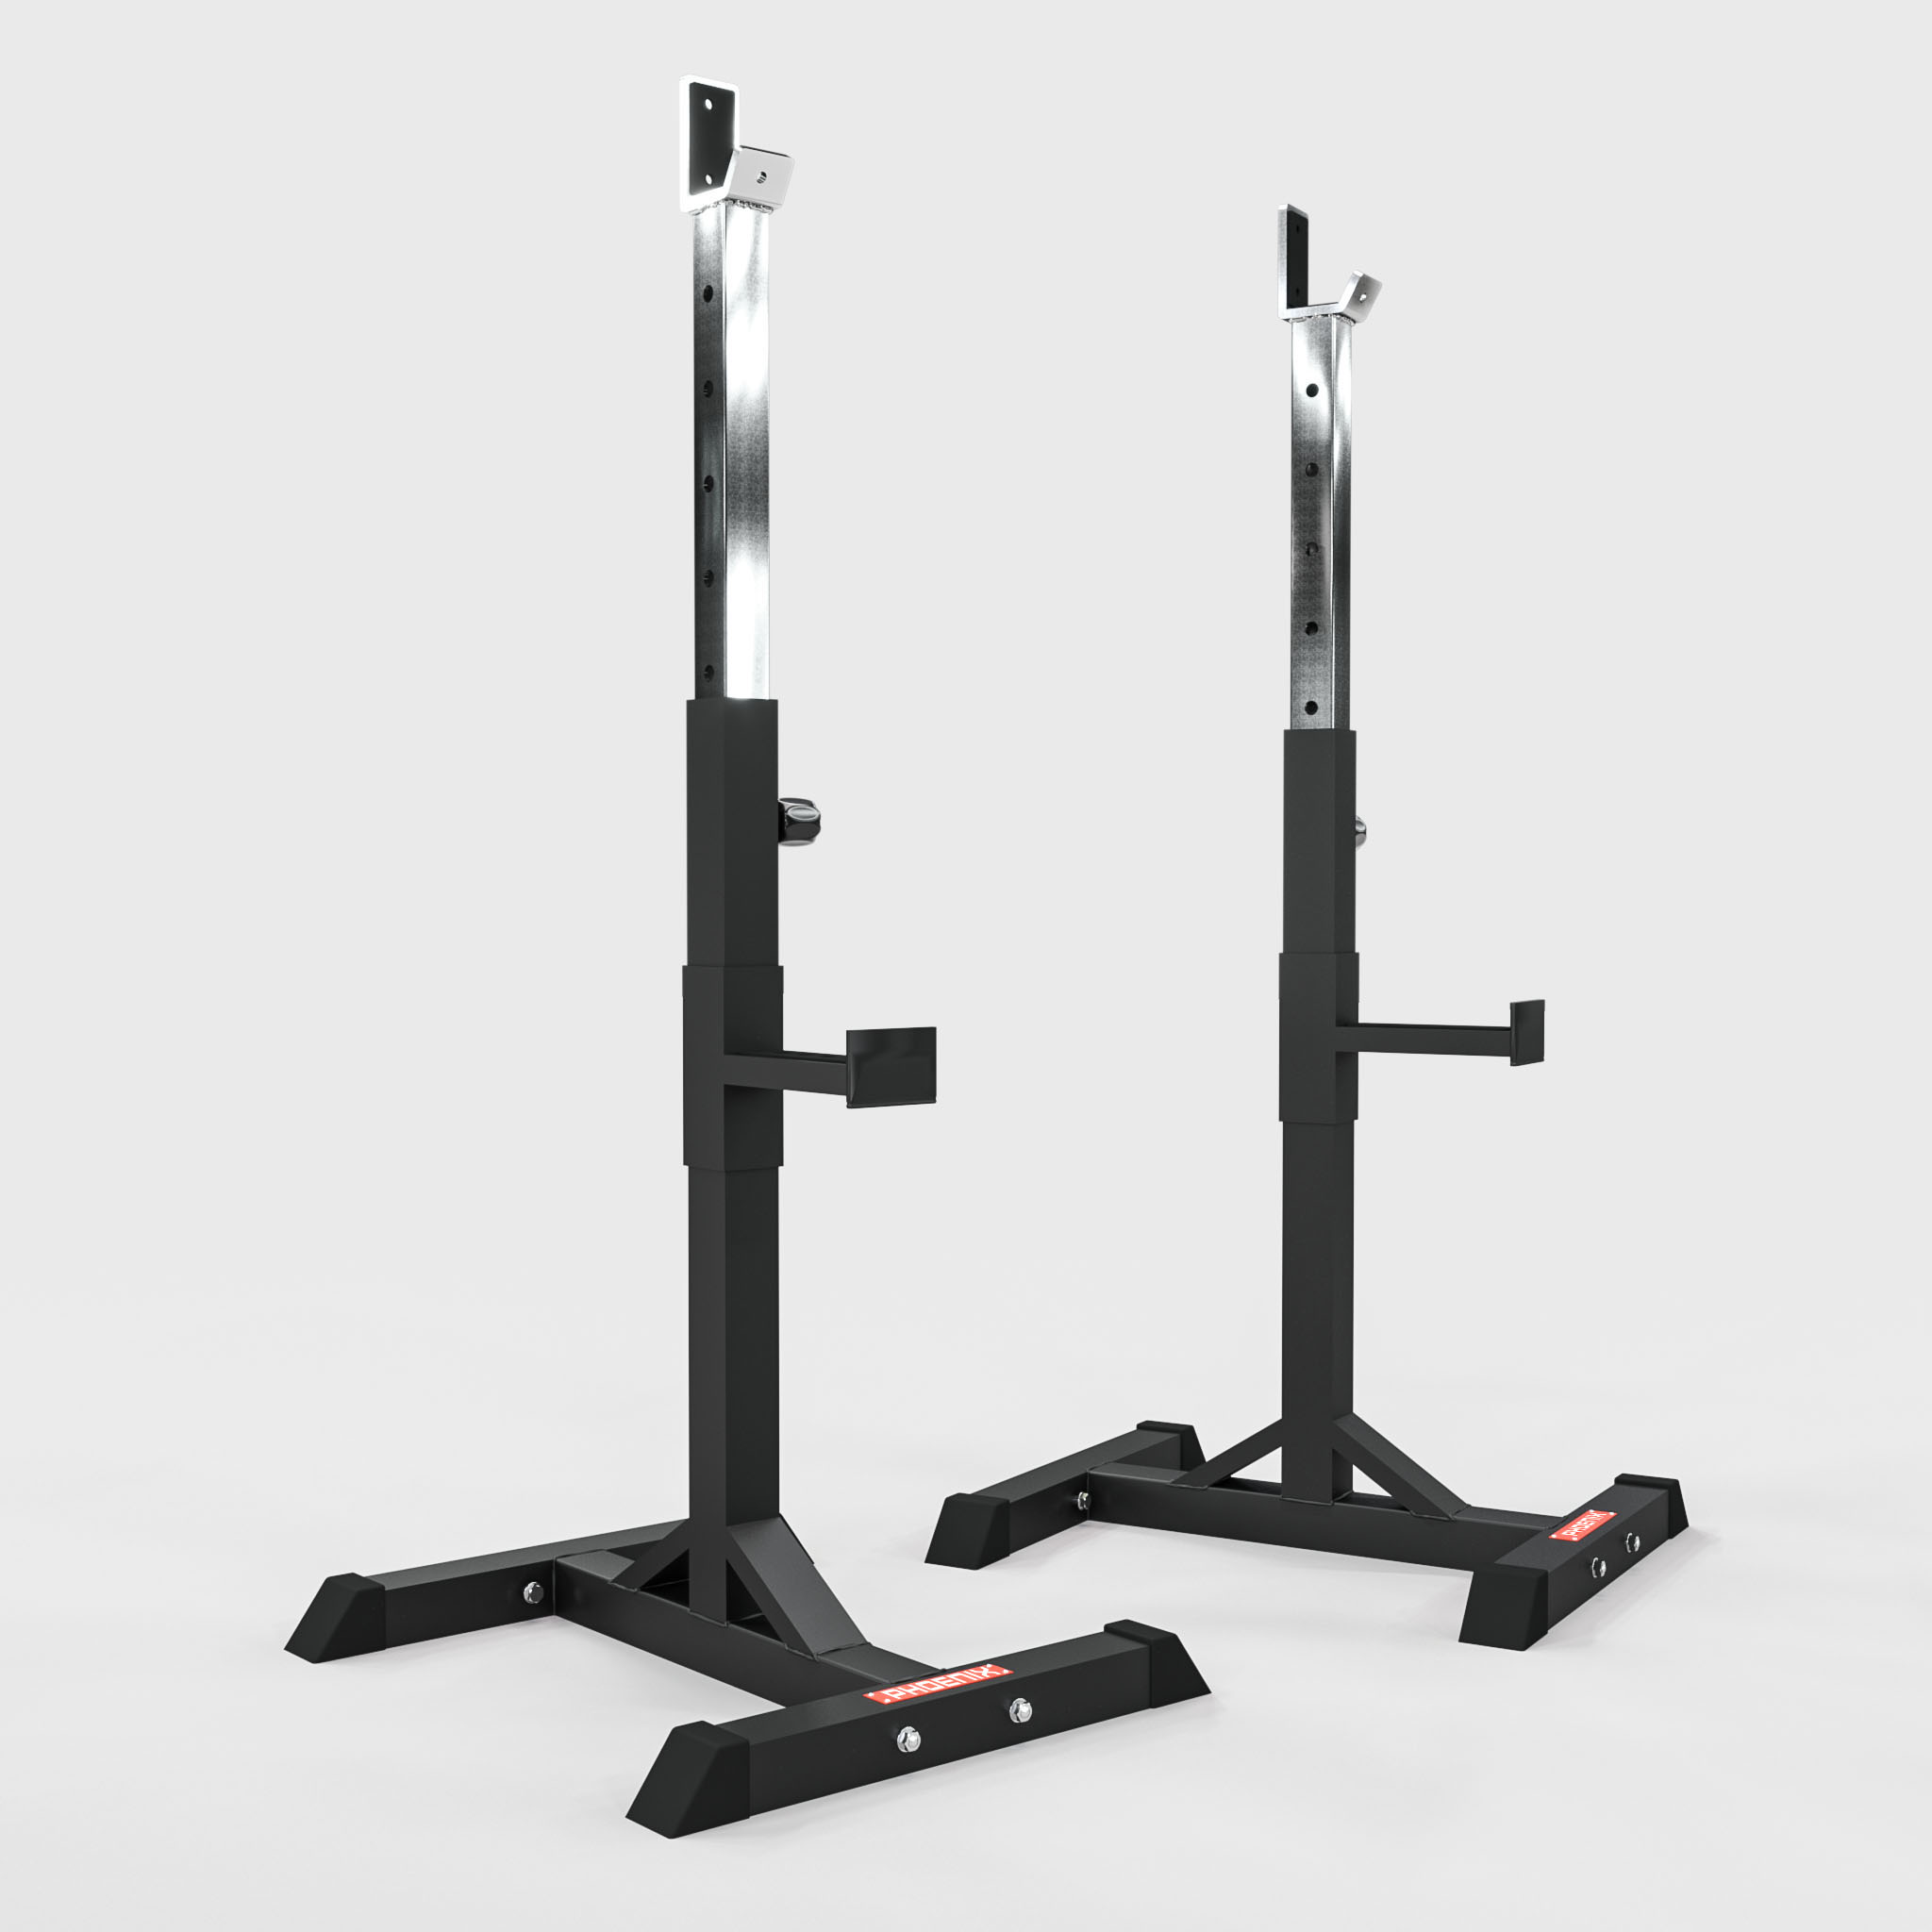 Featured image for “HD Squat Stands - Pair”